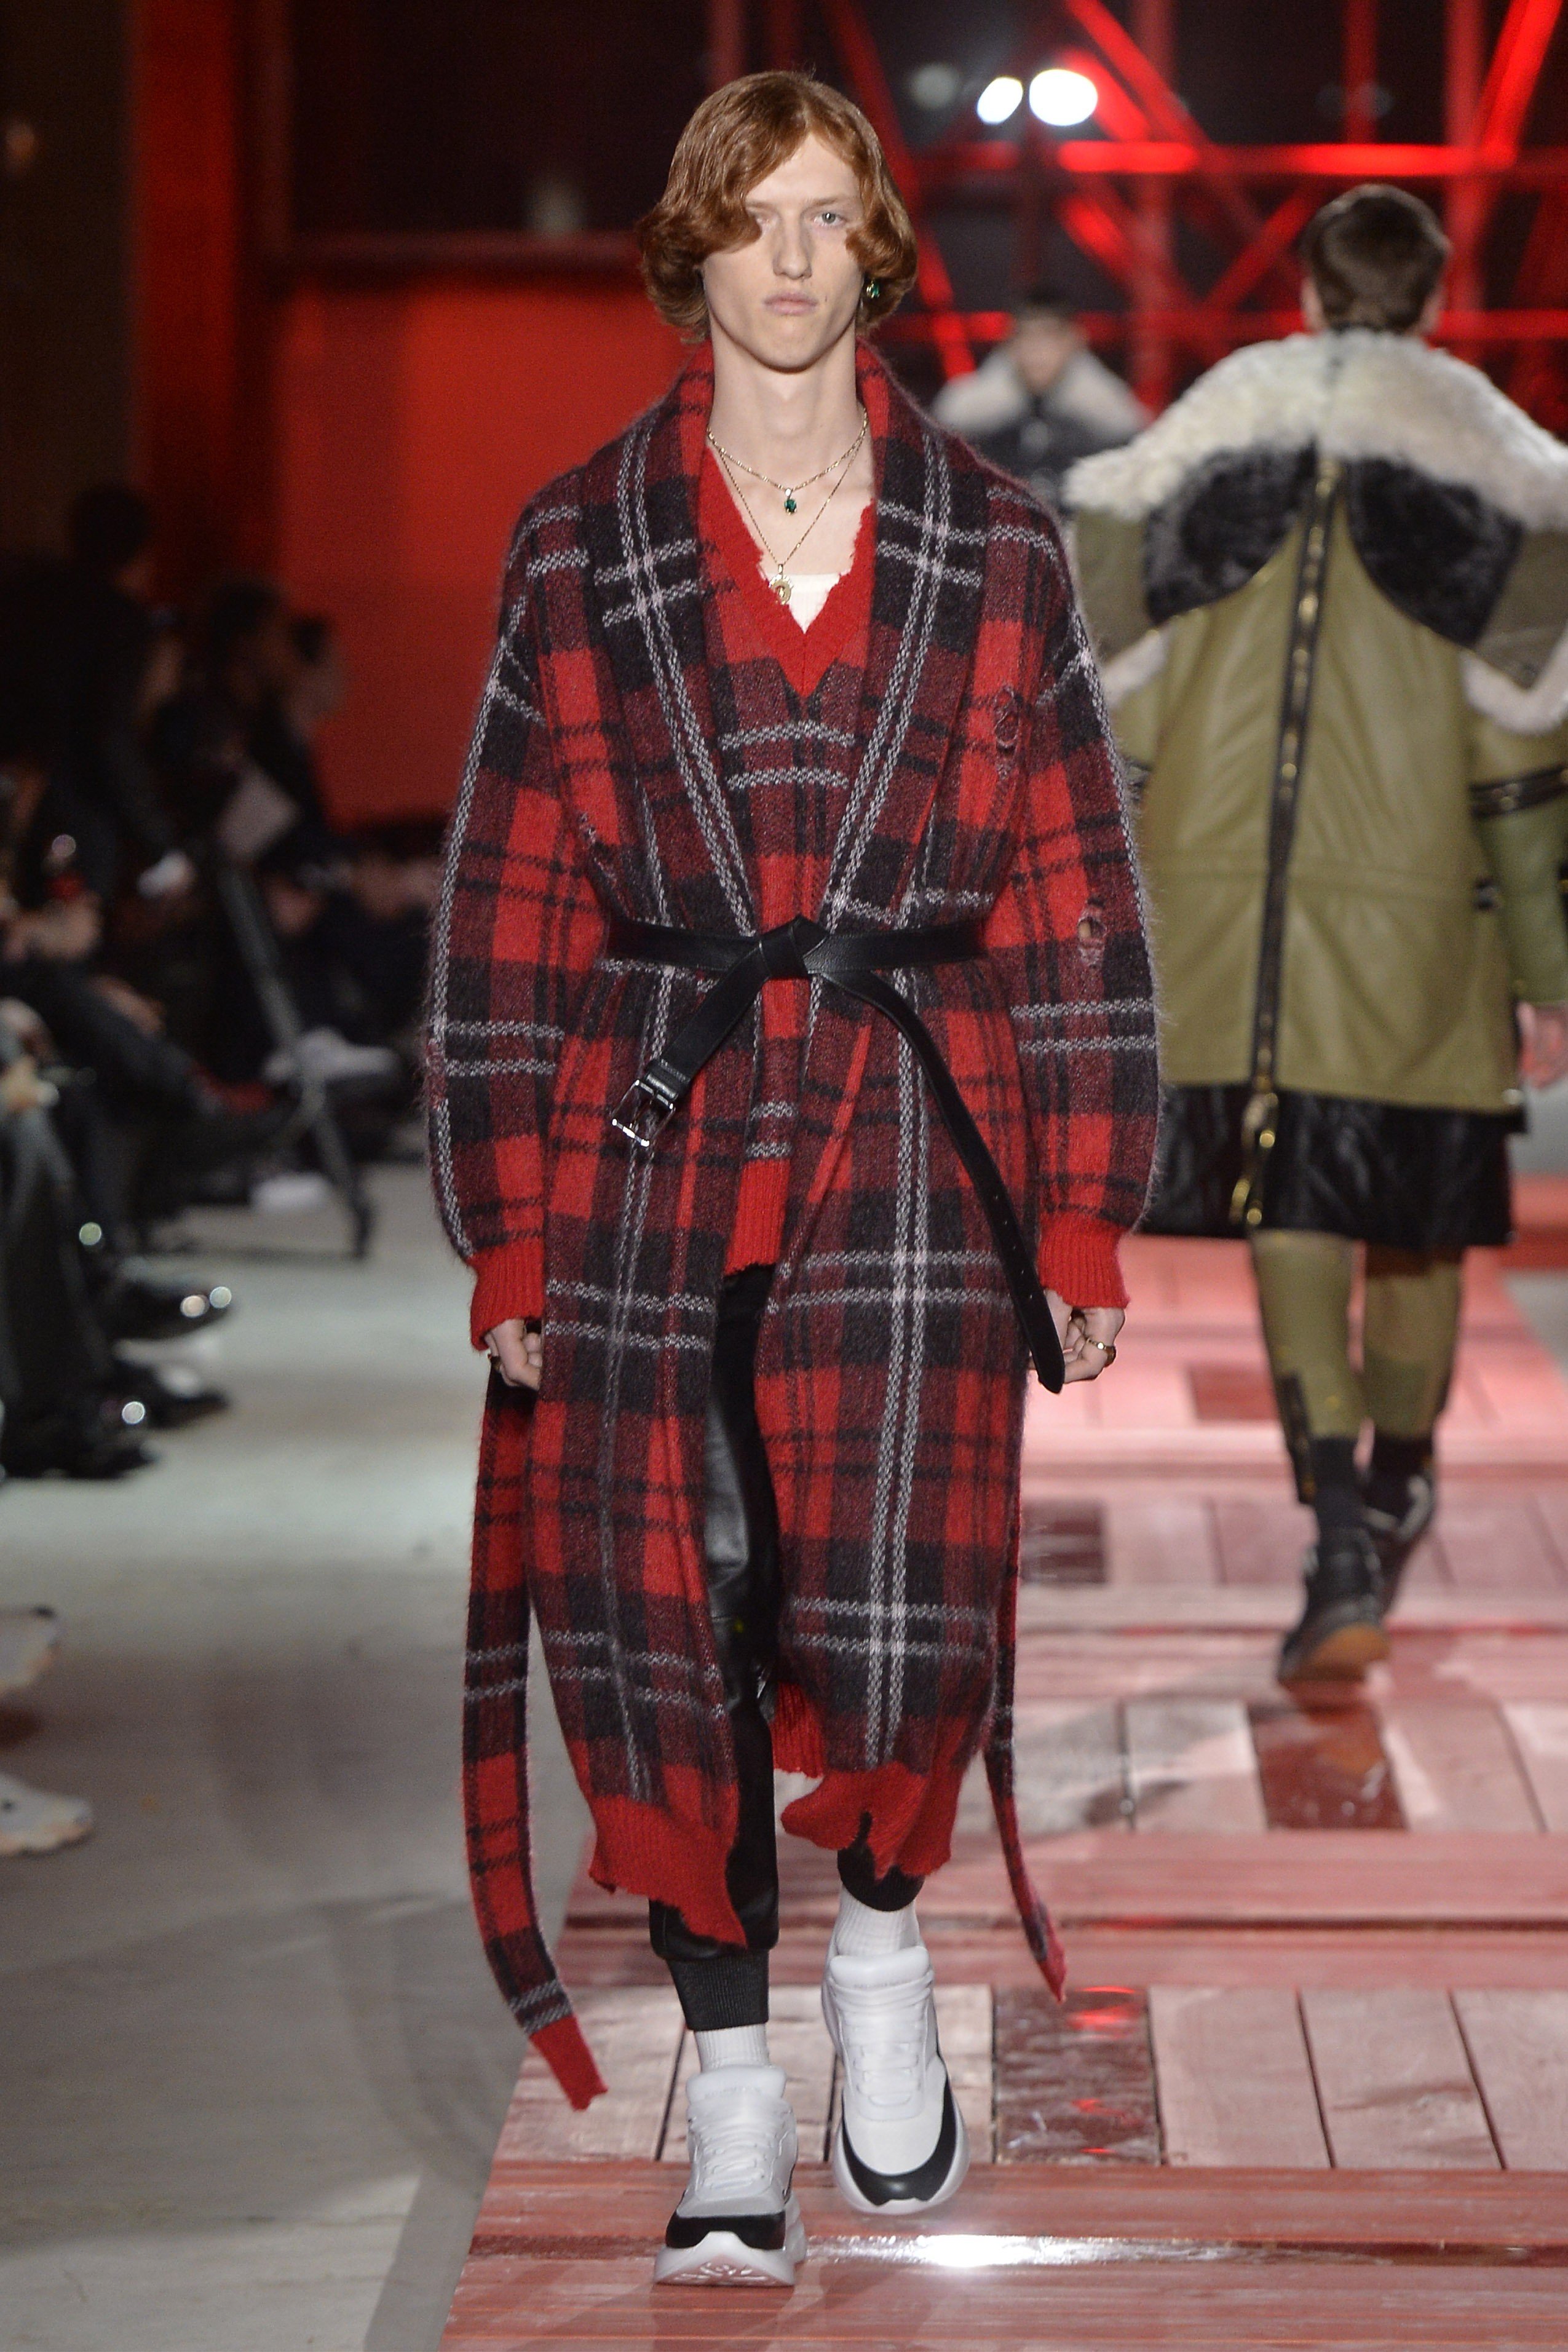 A check pattern trench coat in Alexander McQueen’s autumn/winter 2018 show.